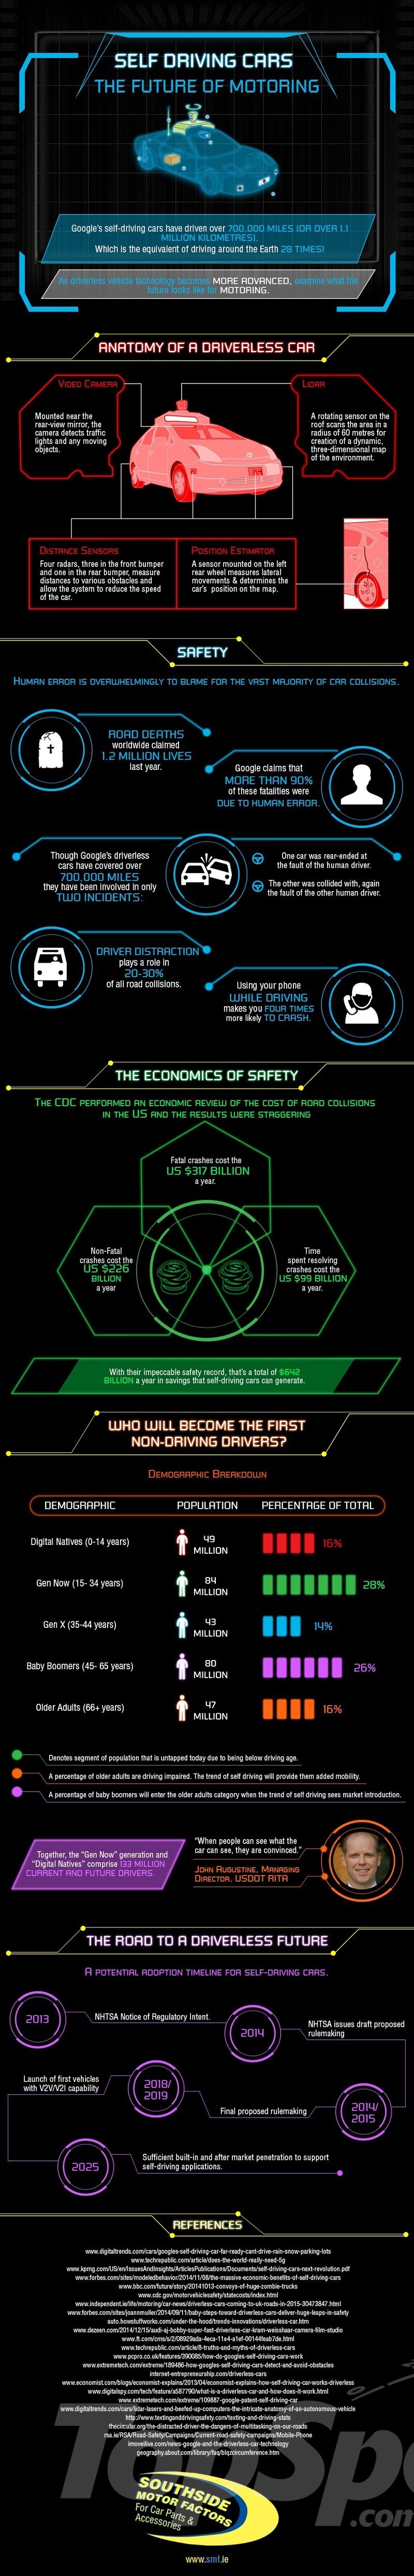 future of self-driving cars